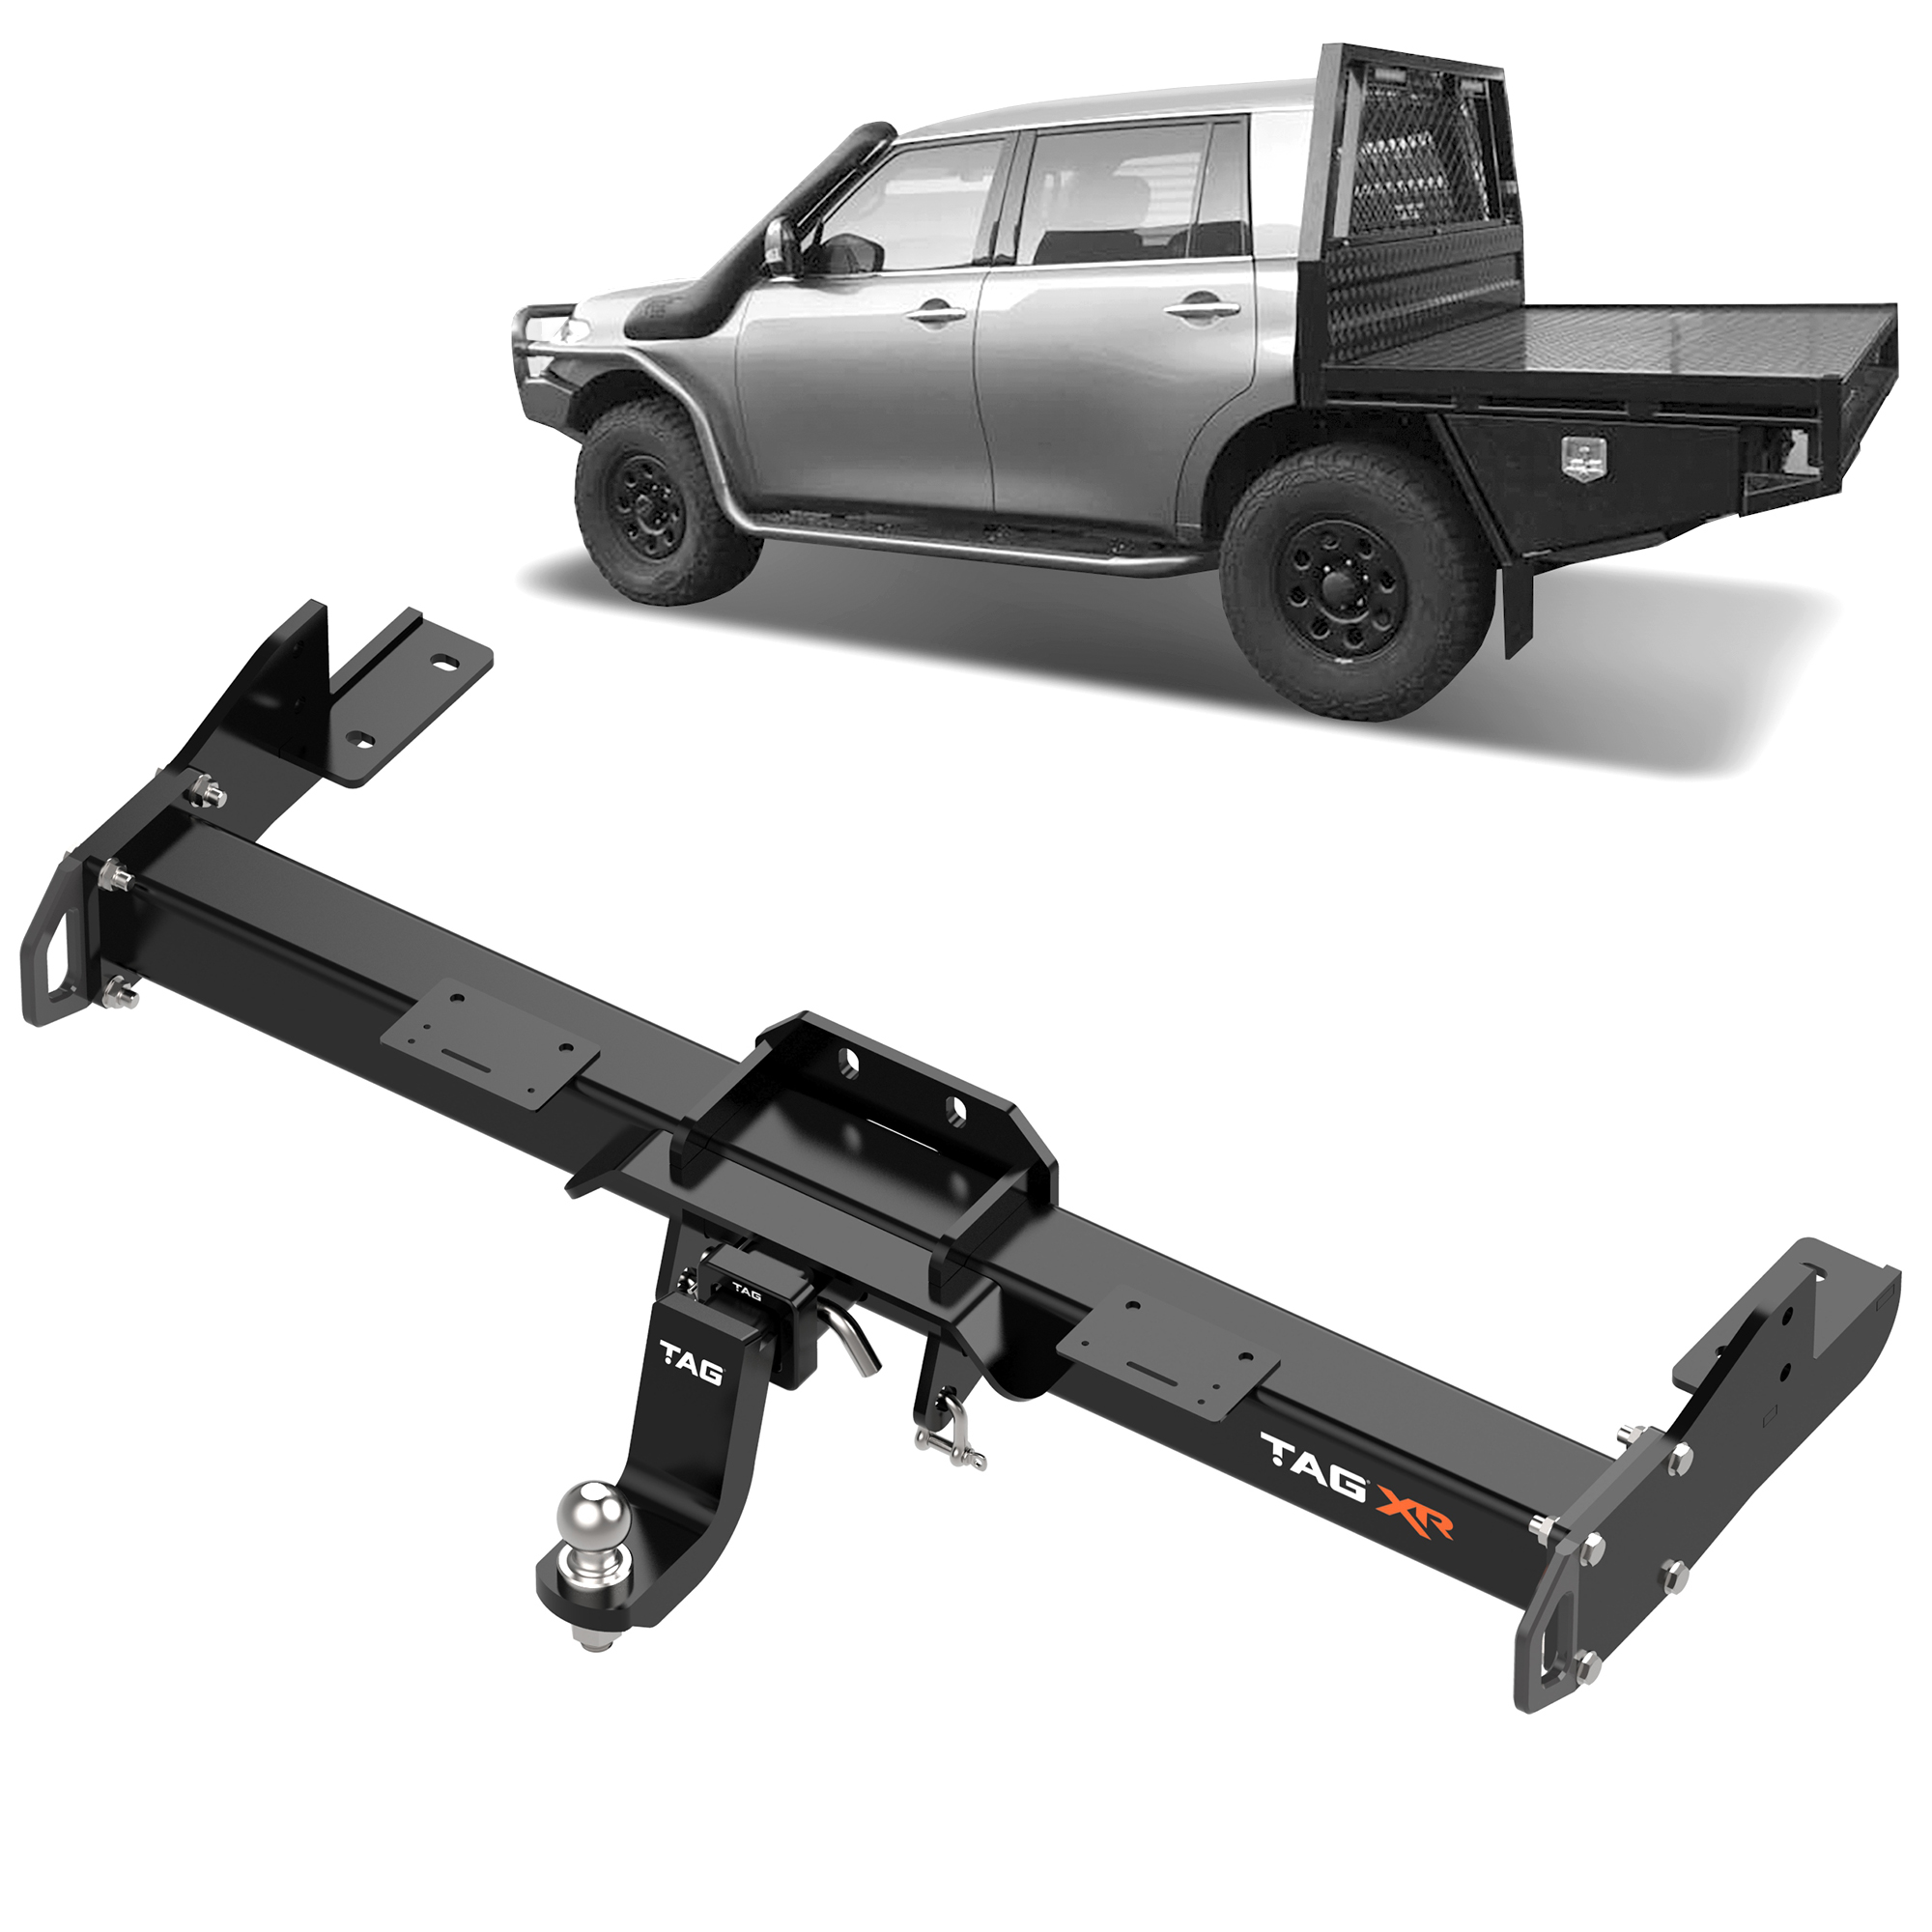 TAG™ Towbar to suit Nissan Patrol Y62 Wagons (12/2012 - on)